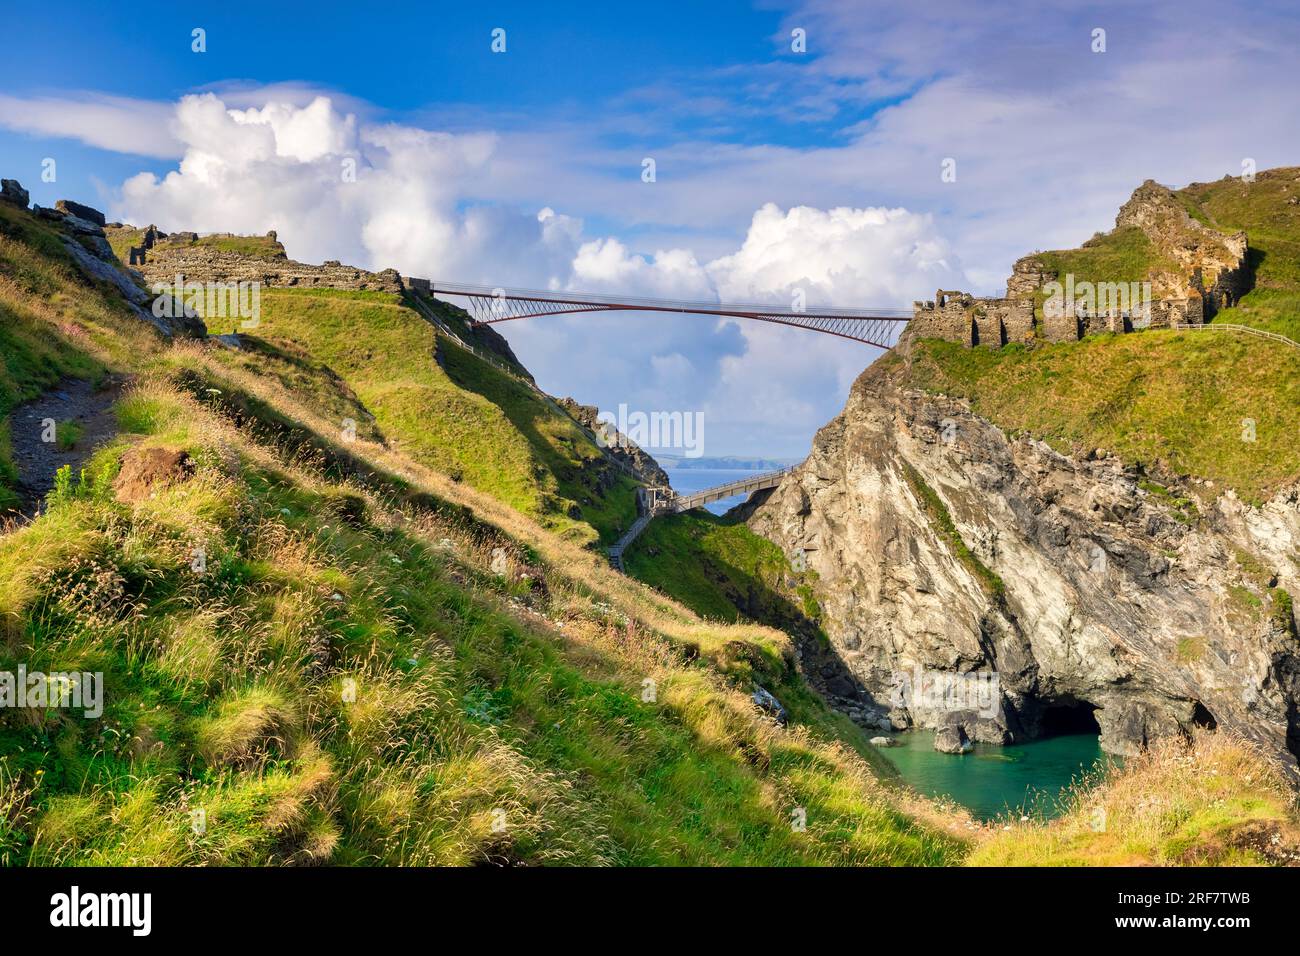 21 June 2023: Tintagel Castle, Cornwall, UK, and its famous double cantilever bridge. It is the legendary birthplace of King Arthur. Merlin's cave... Stock Photo